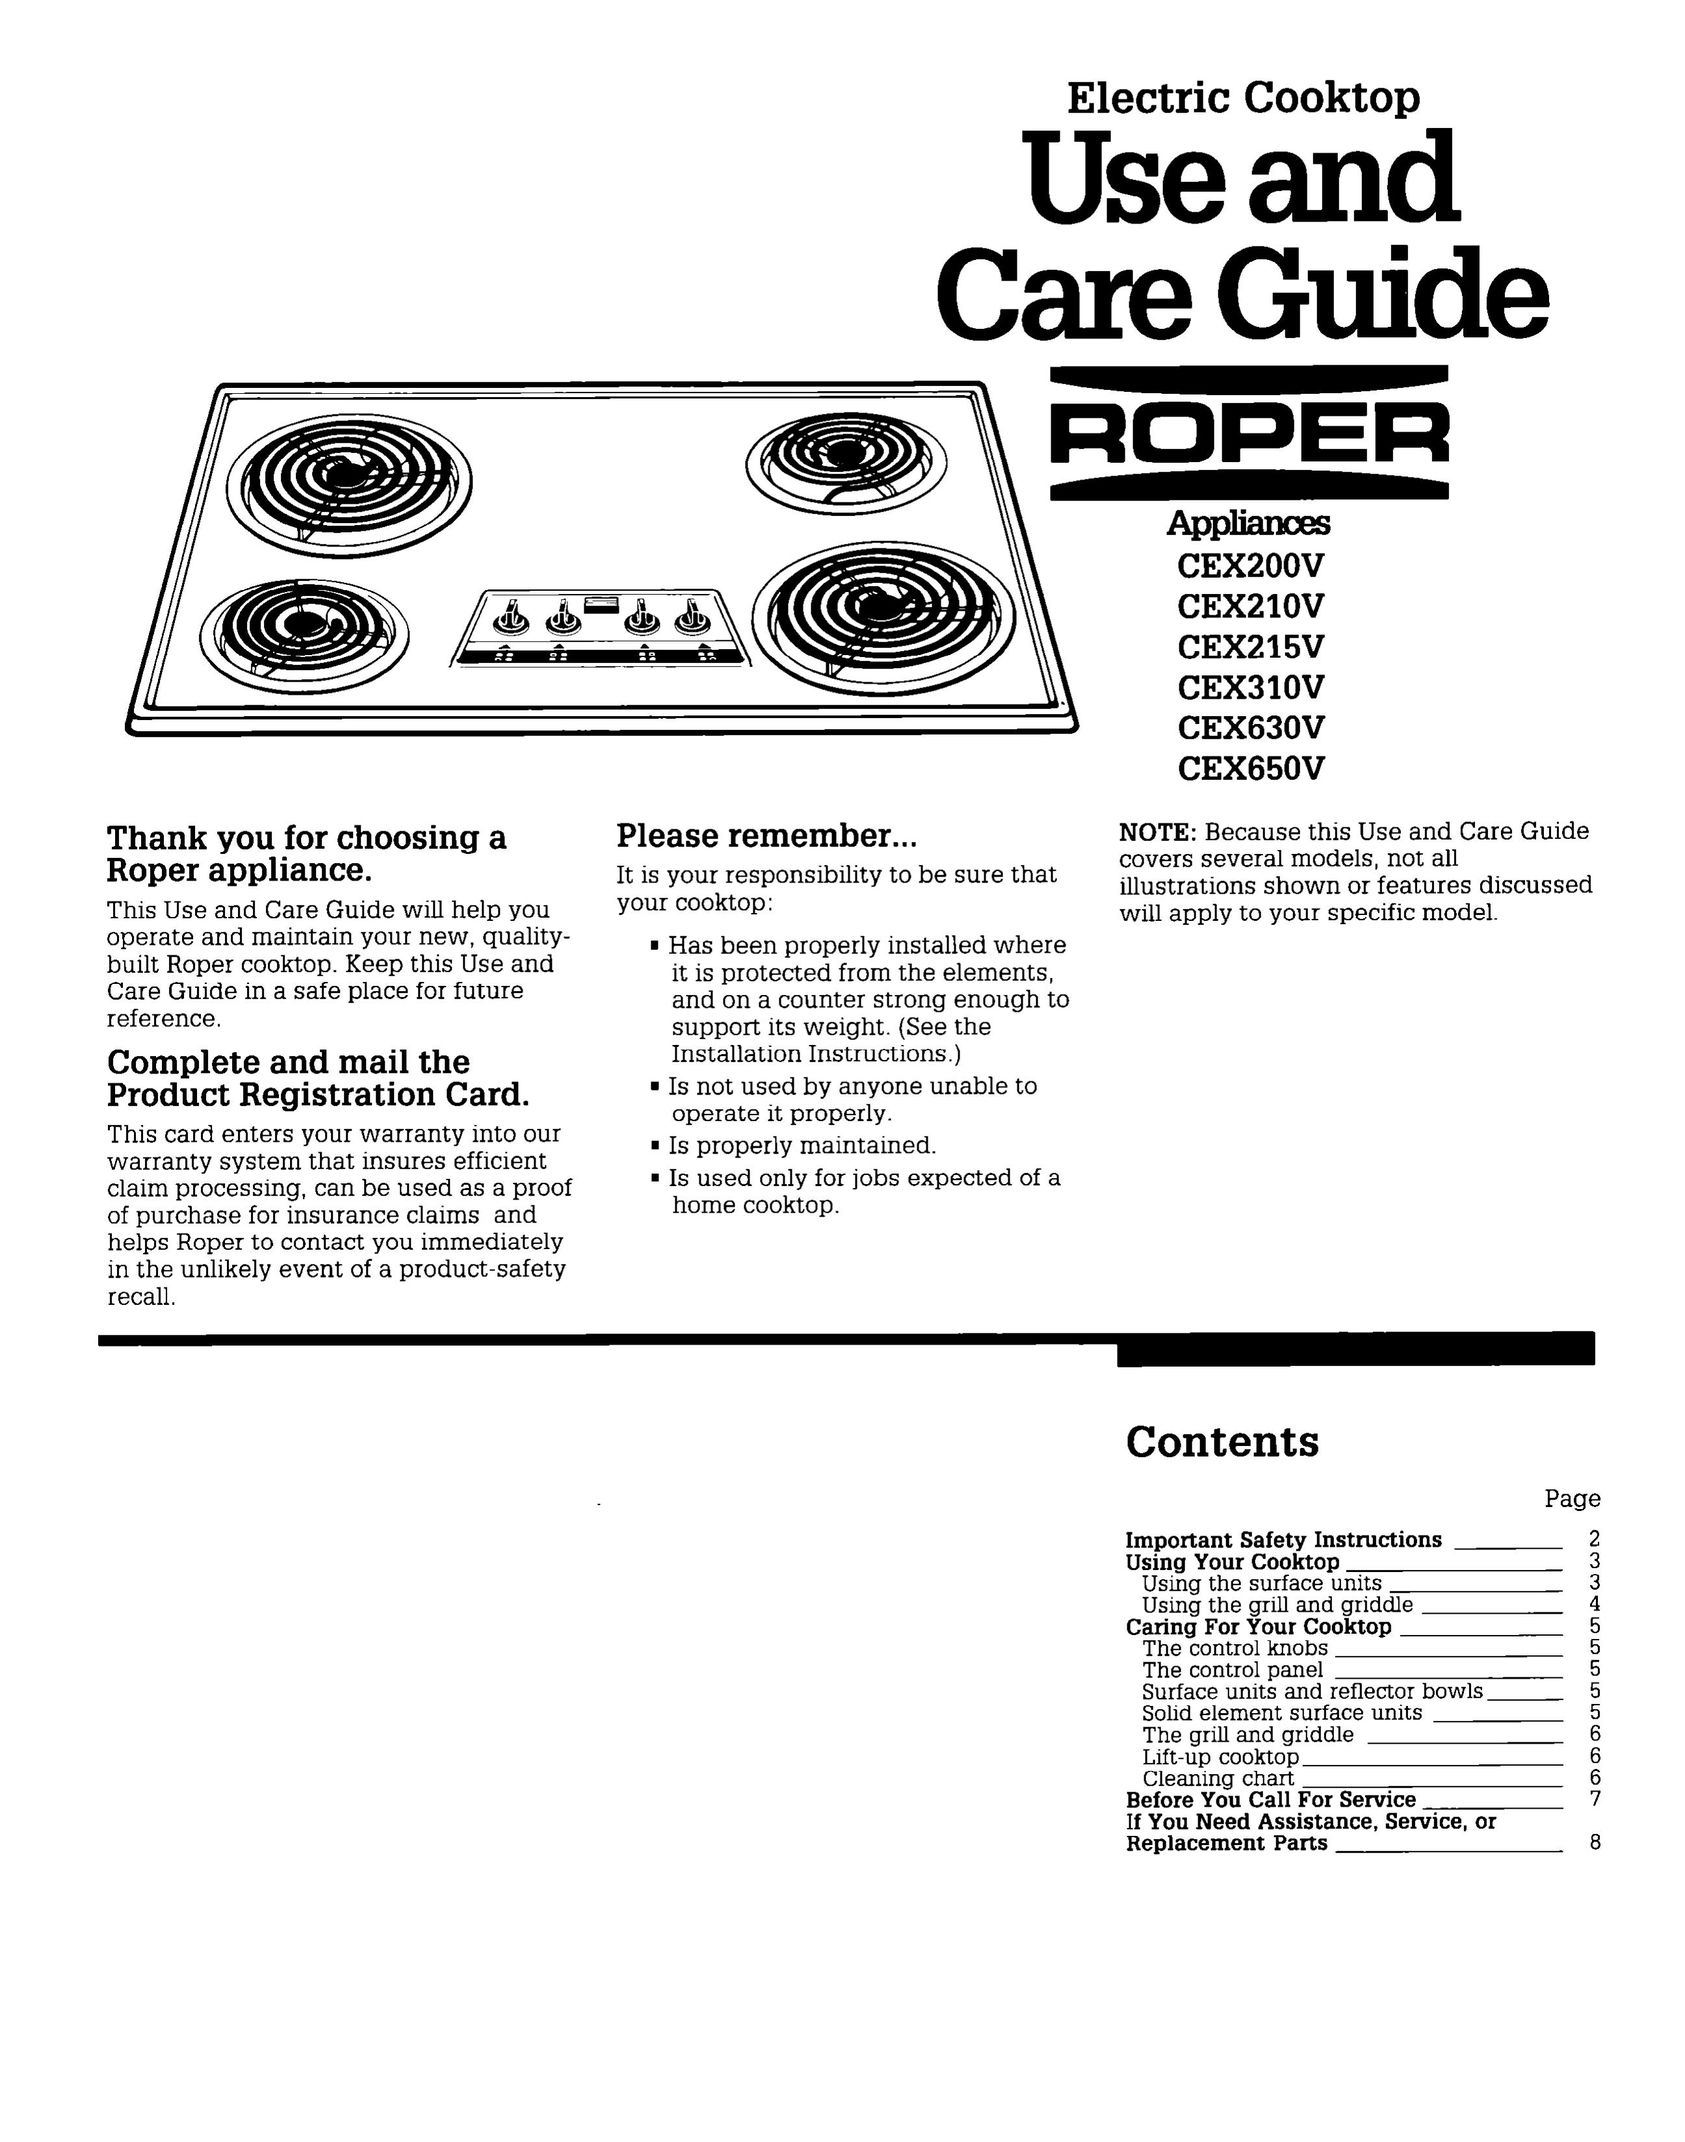 Whirlpool CEX630V Cooktop User Manual